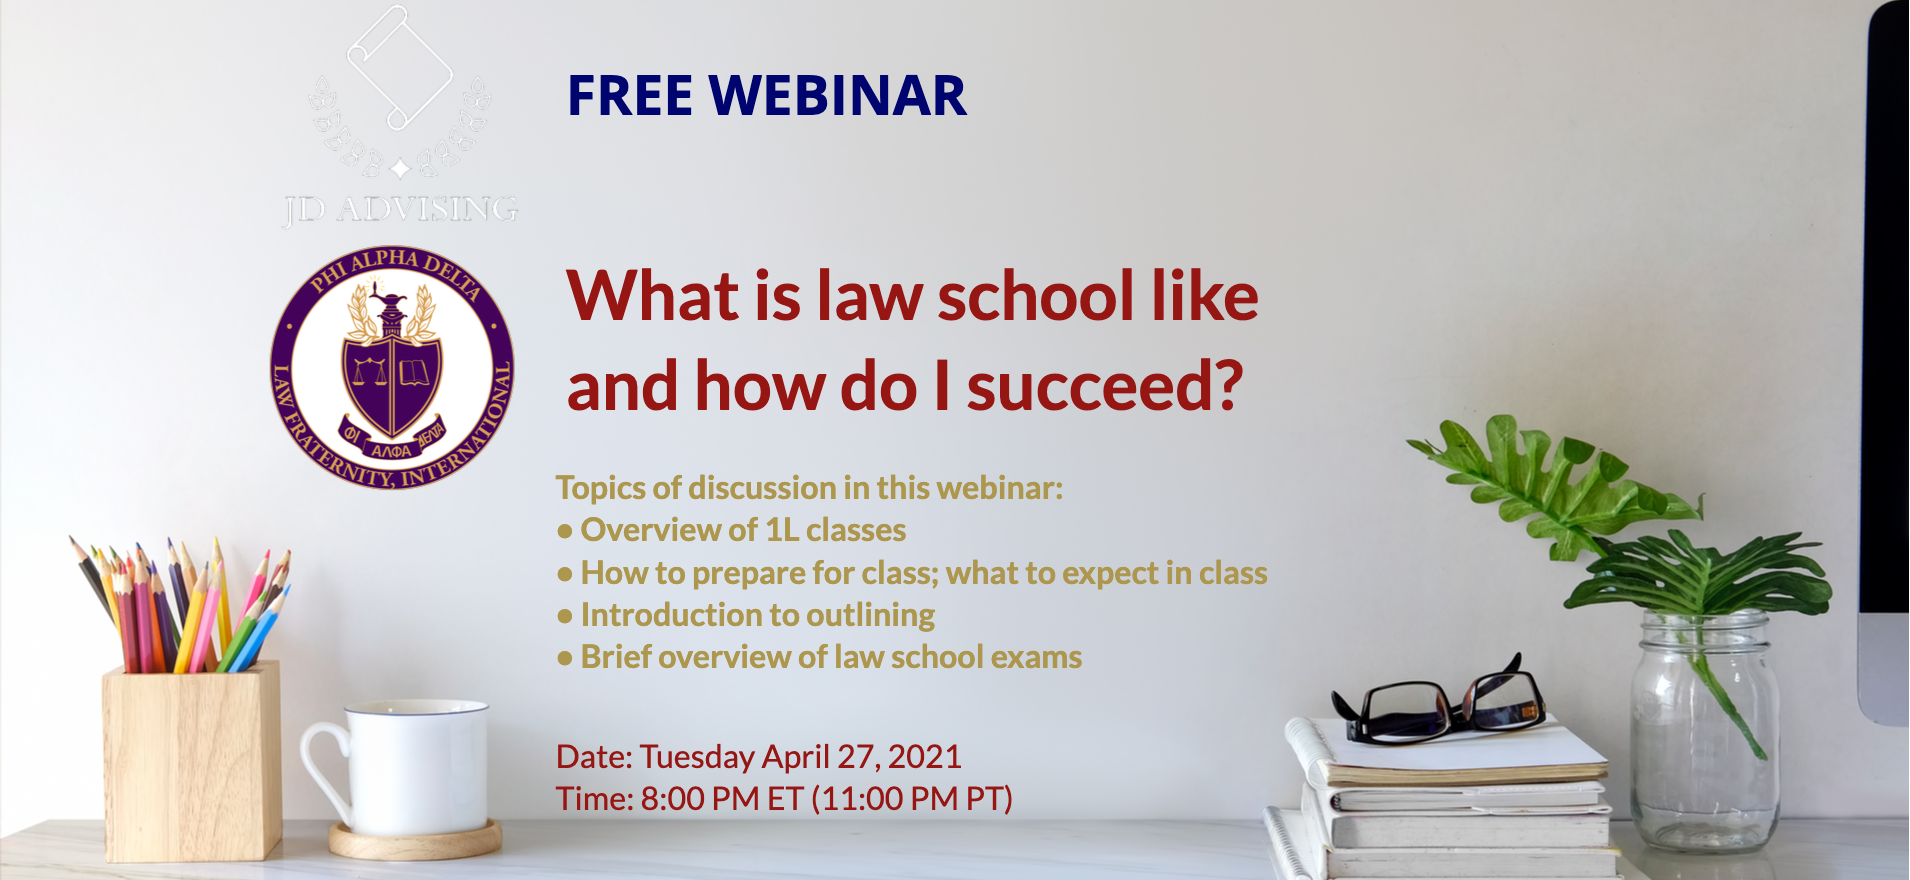 What is law school like and how do I succeed?